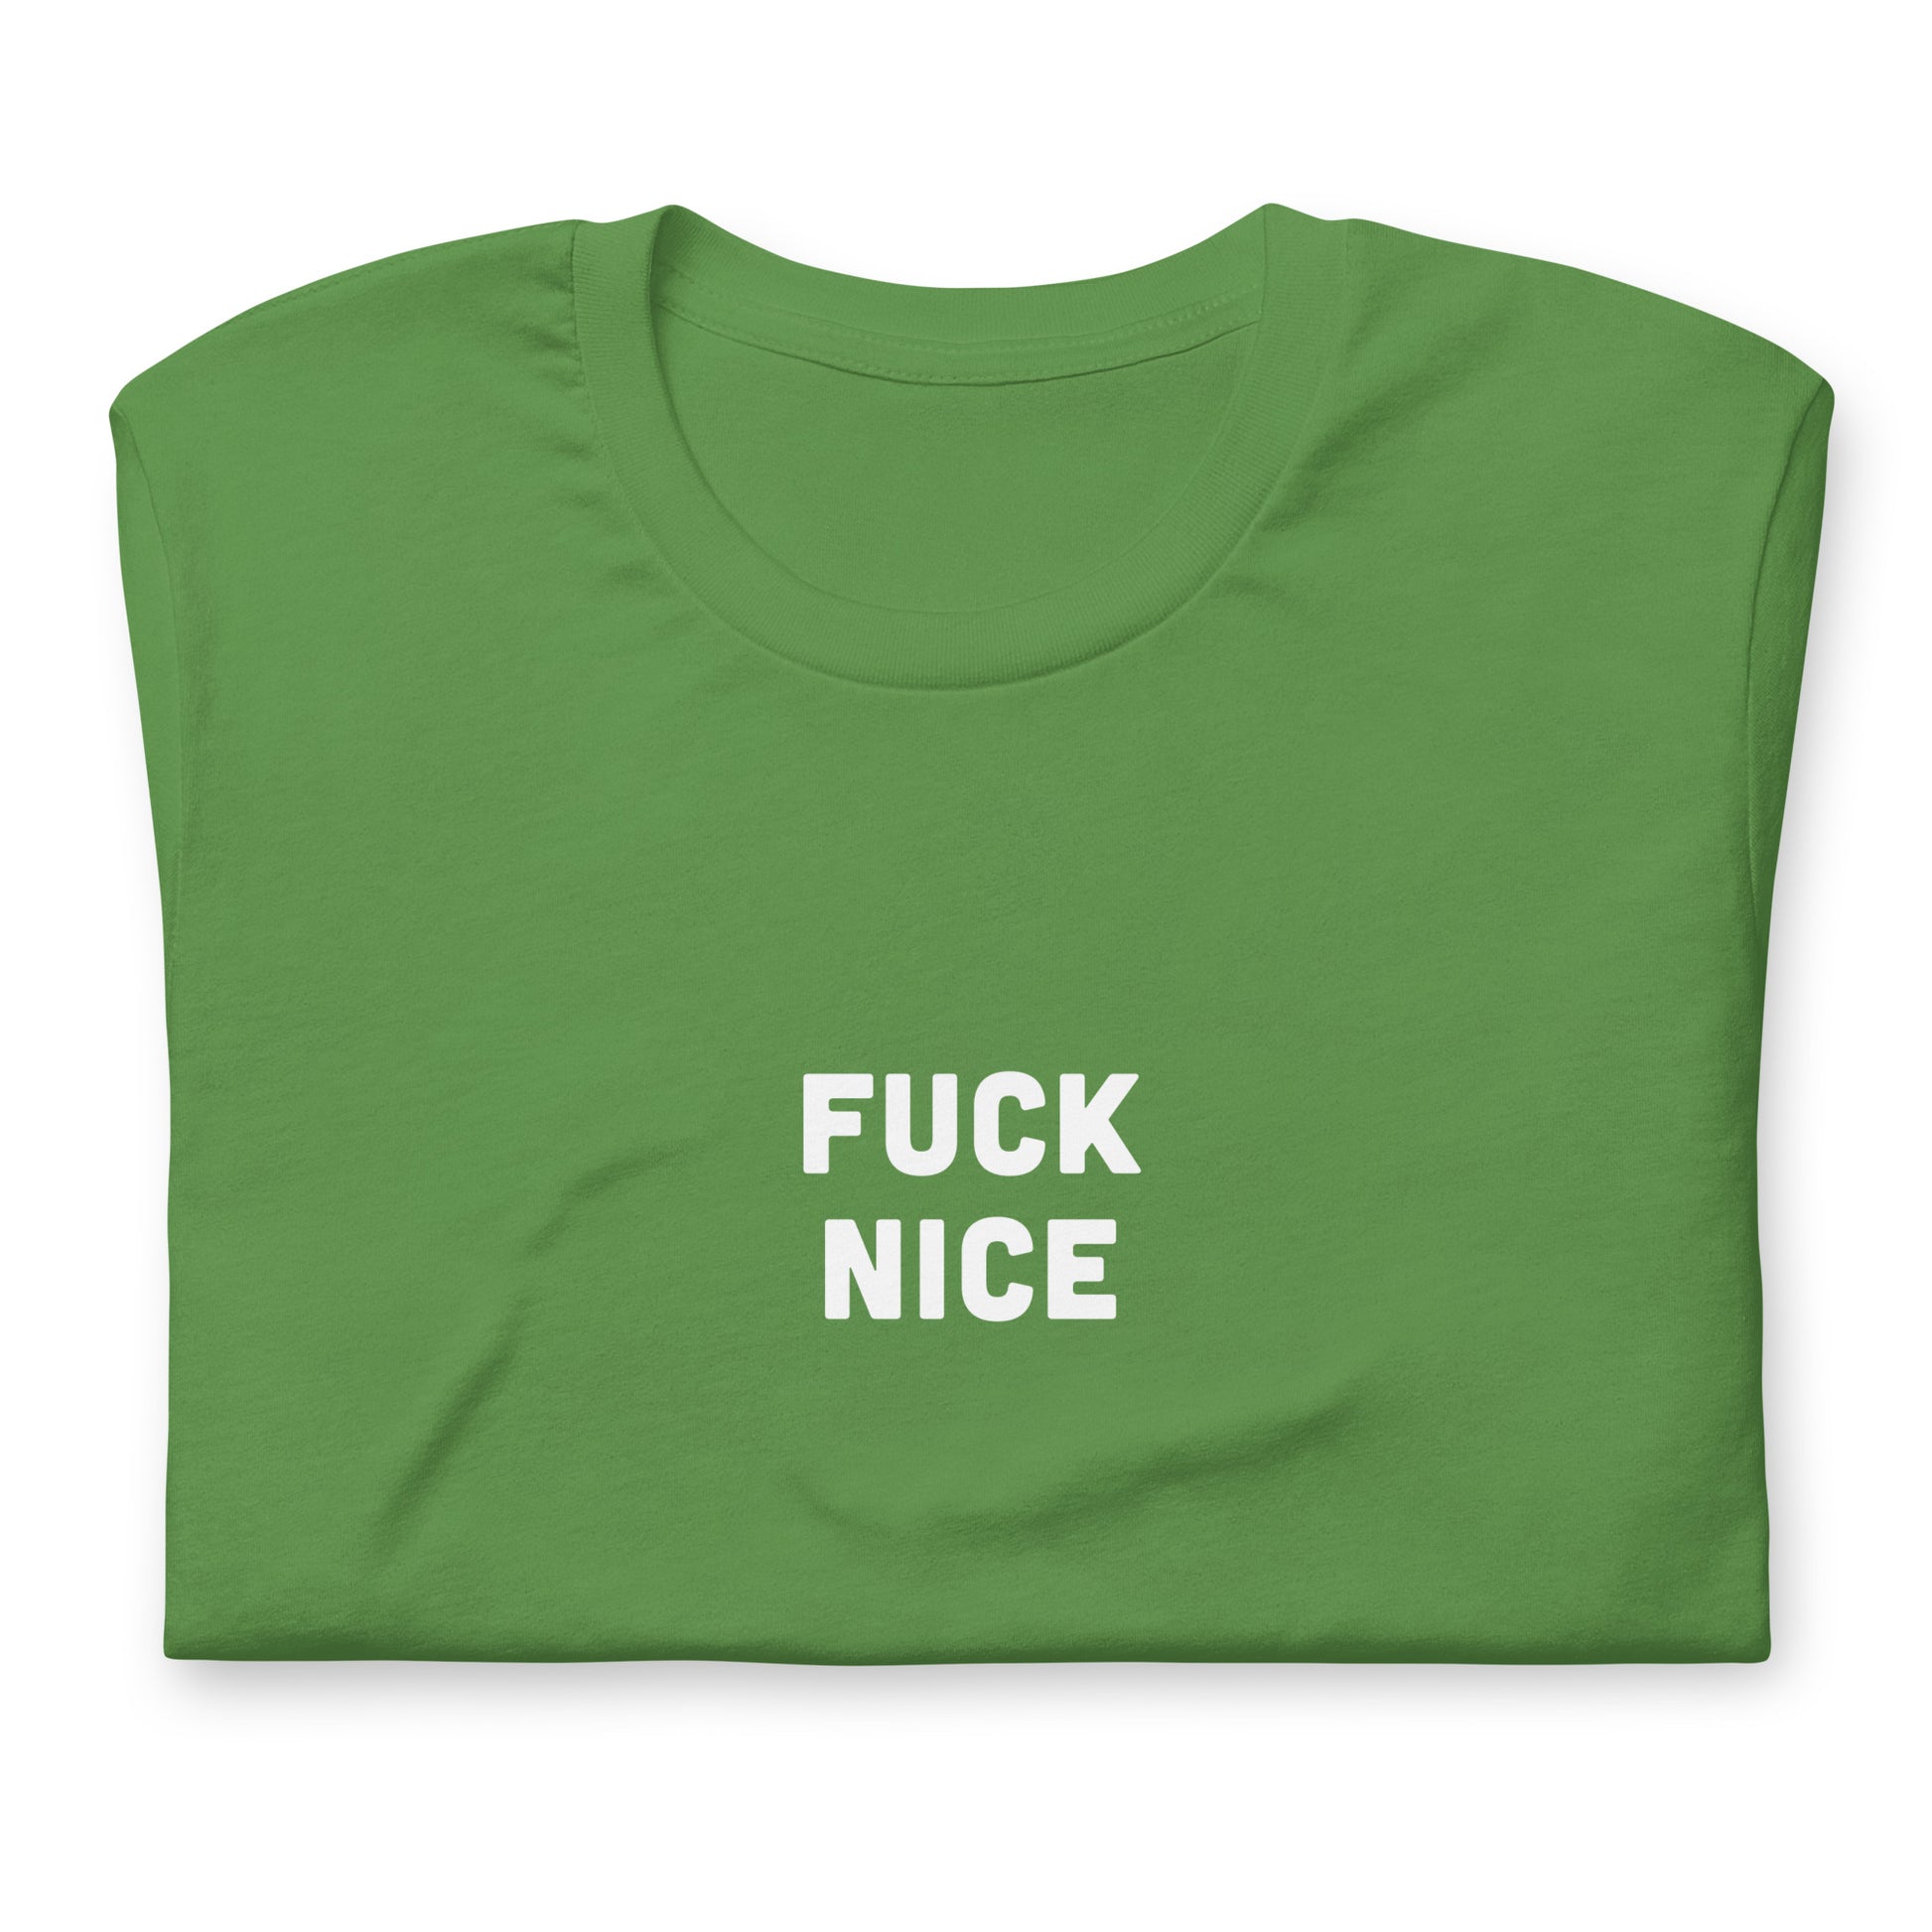 Fuck Nice T-Shirt Size 2XL Color Navy